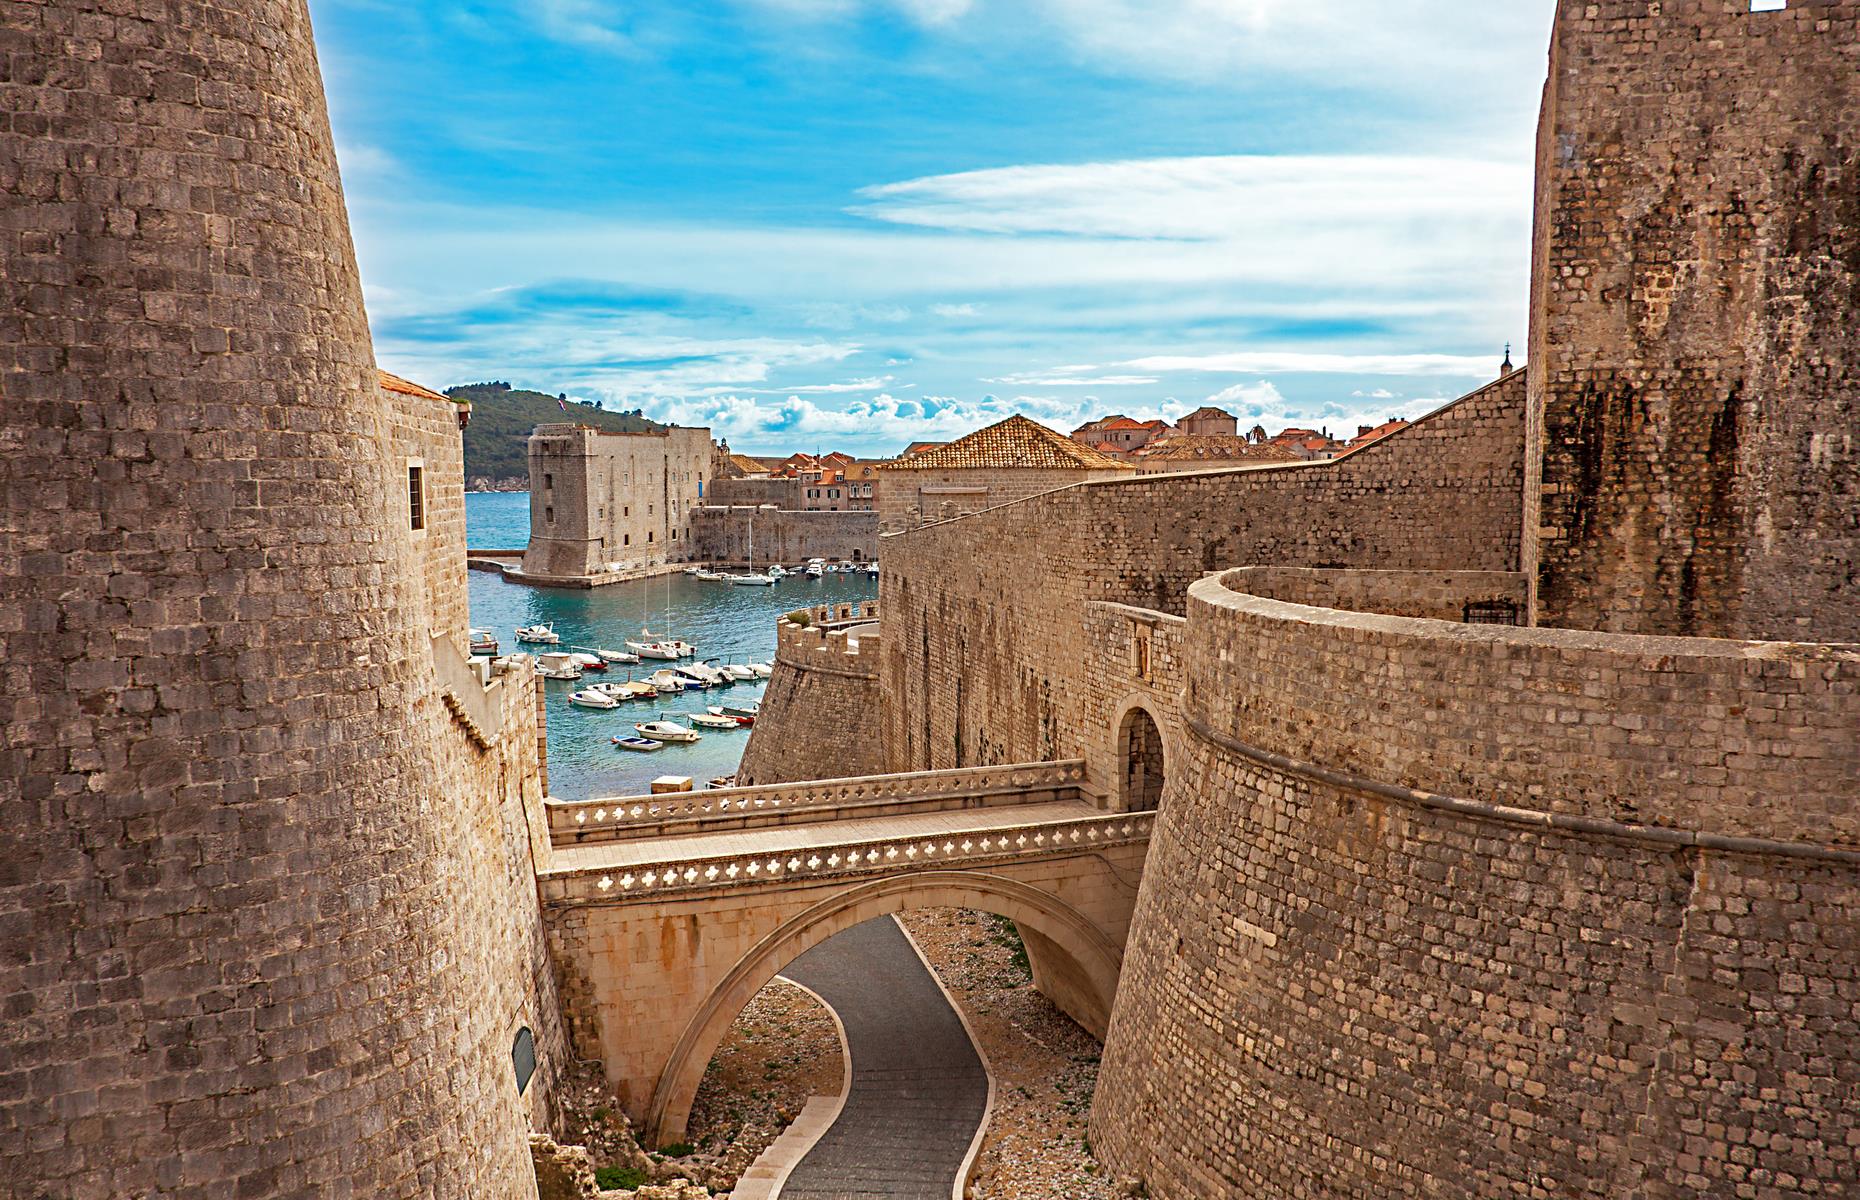 <p>Dubrovnik’s 13th-century Old Town looks more like an oversized sculpture than a city. From its apricot and honey-hued rooftops to its wide, marble roads, it’s almost too pretty to be true. Thick, beautifully preserved stone walls encompass this part with walkways that give clear views in every direction, from hillsides with hotels and houses to the Adriatic Sea, whose sapphire water is dotted with verdant islands. Here's our <a href="https://www.loveexploring.com/news/92374/things-to-do-in-dubrovnik-game-of-thrones-dubrovnik-holidays-croatia">guide to a weekend in Dubrovnik</a>.</p>